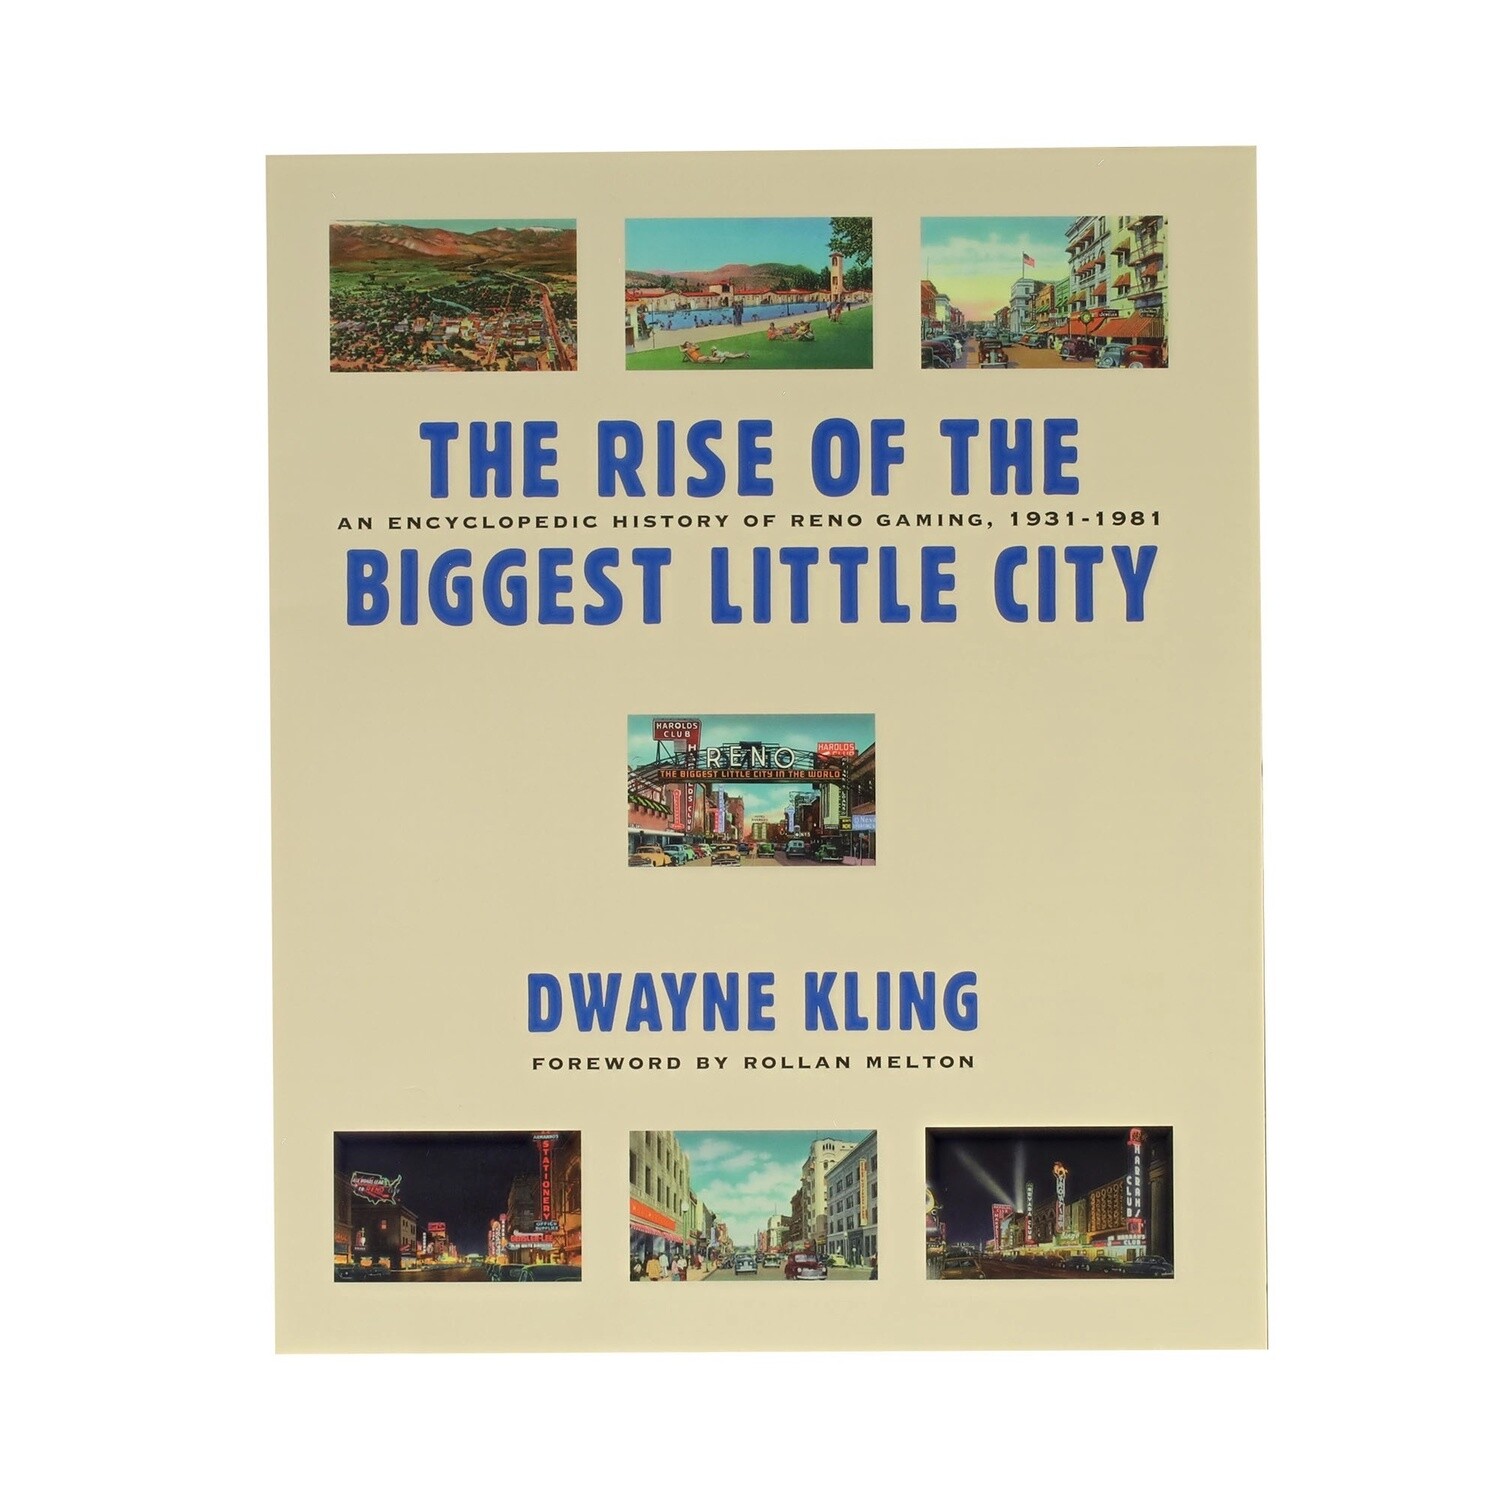 The Rise of the Biggest Little City by Dwayne Kling